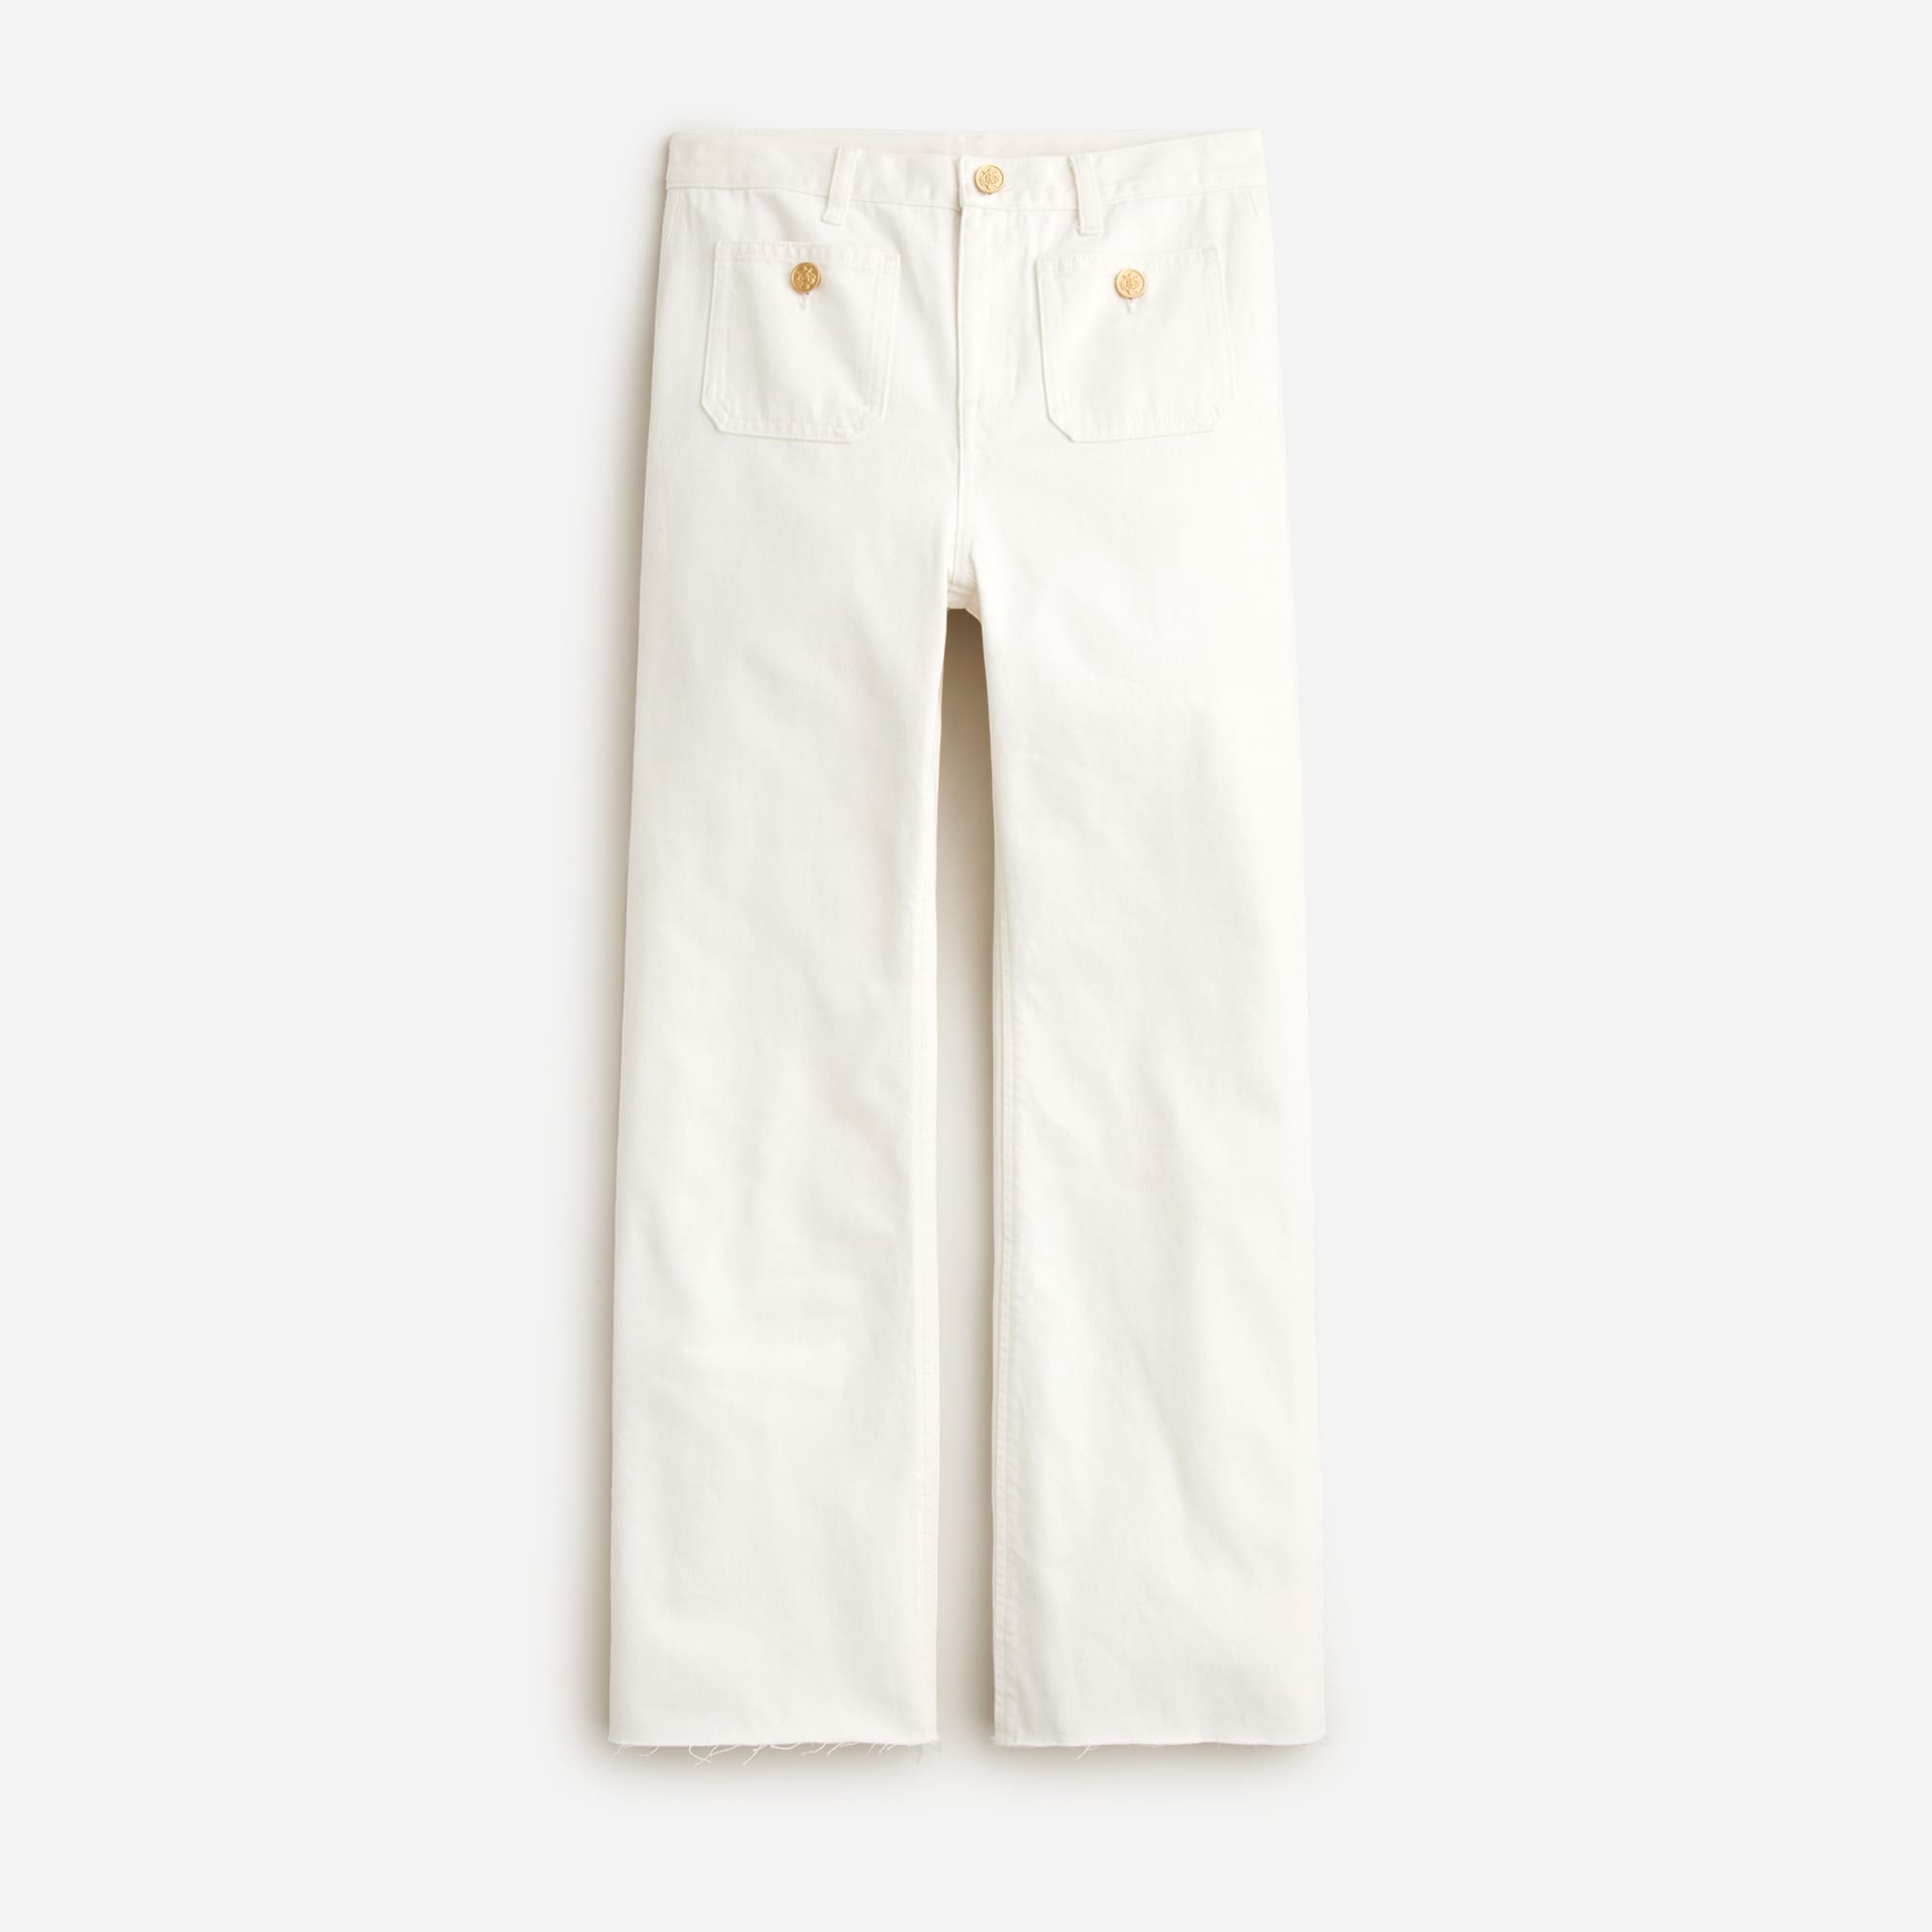  Petite sailor mid-rise relaxed demi-boot jean in white